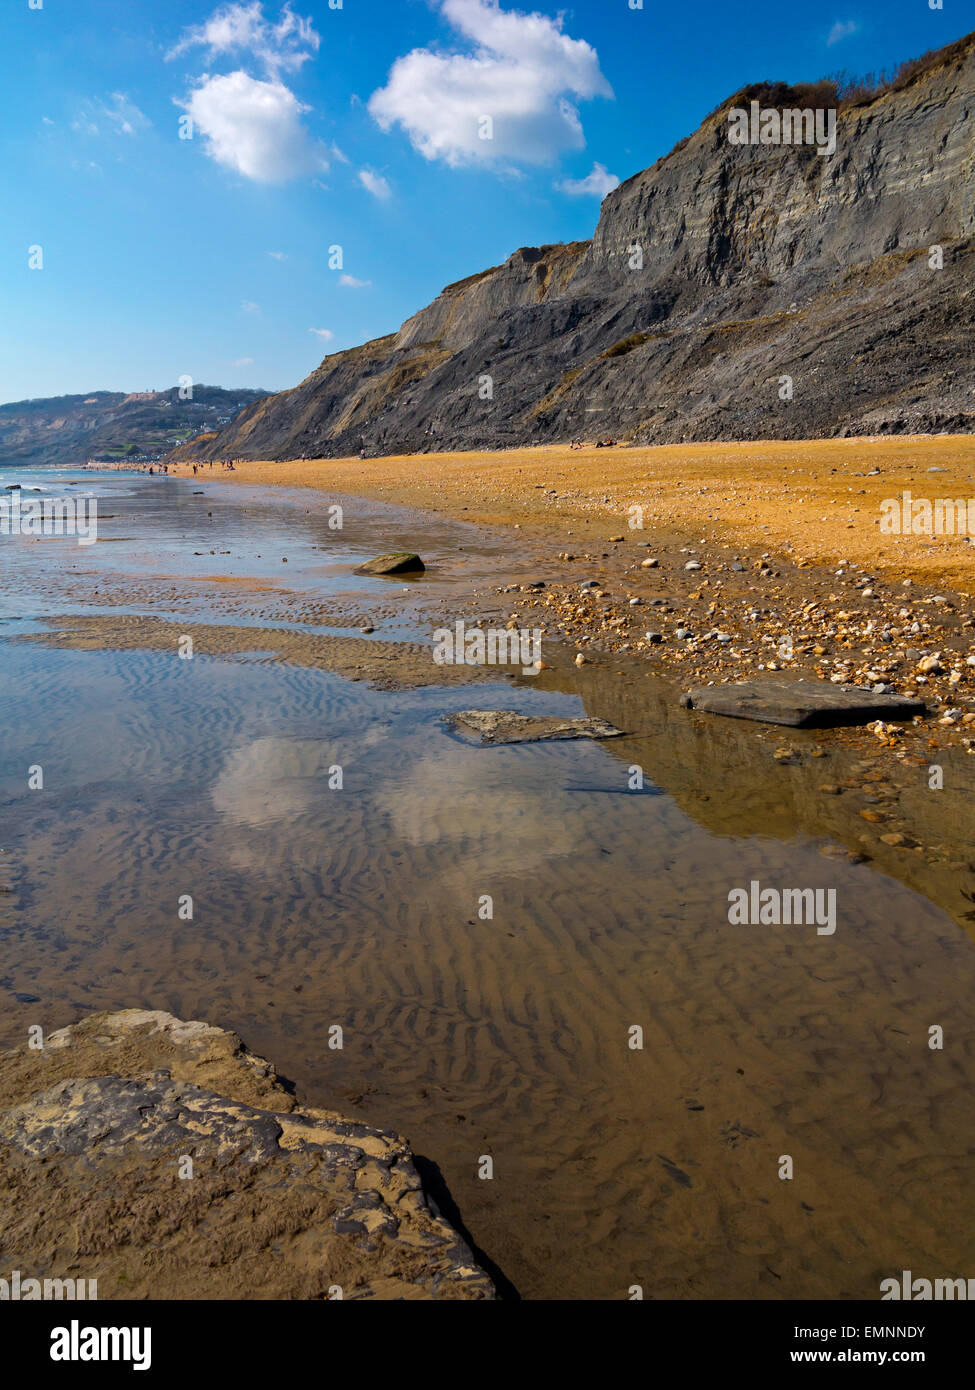 The beach at Charmouth on the Jurassic Coast in West Dorset England UK where fossils are found in the cliffs as they erode Stock Photo